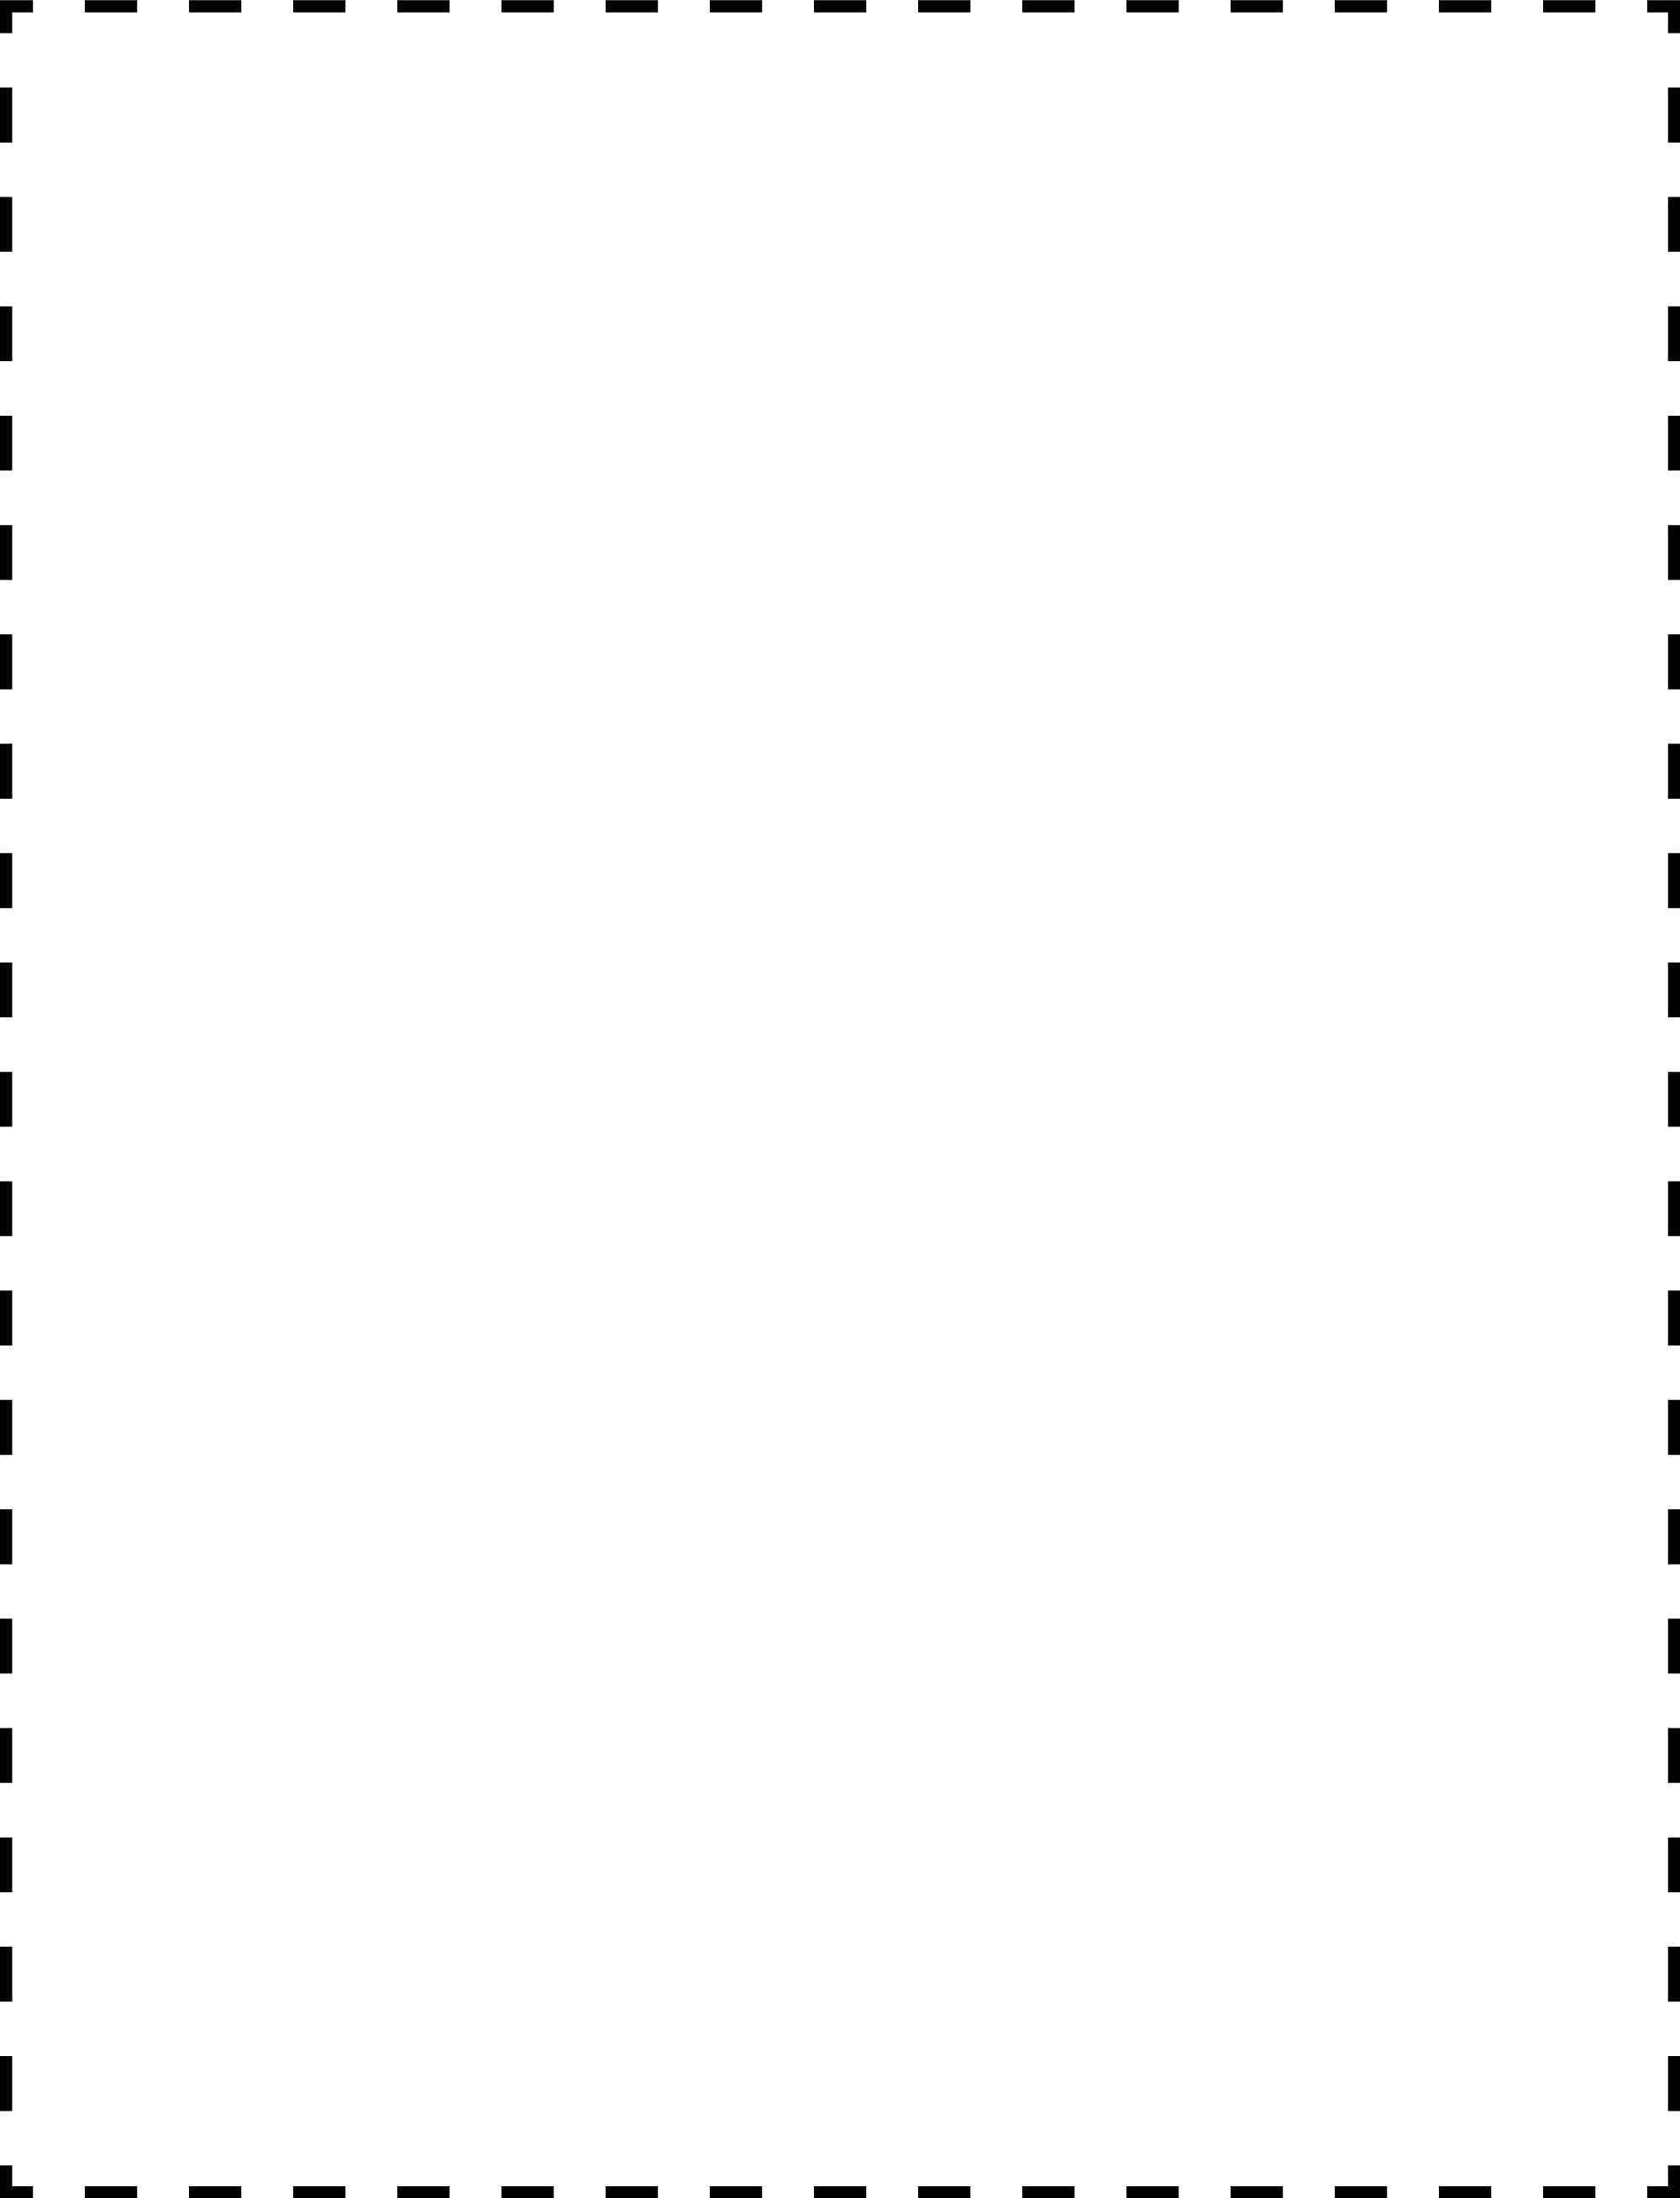 558-2037-coupon-outline-4x5-k.png